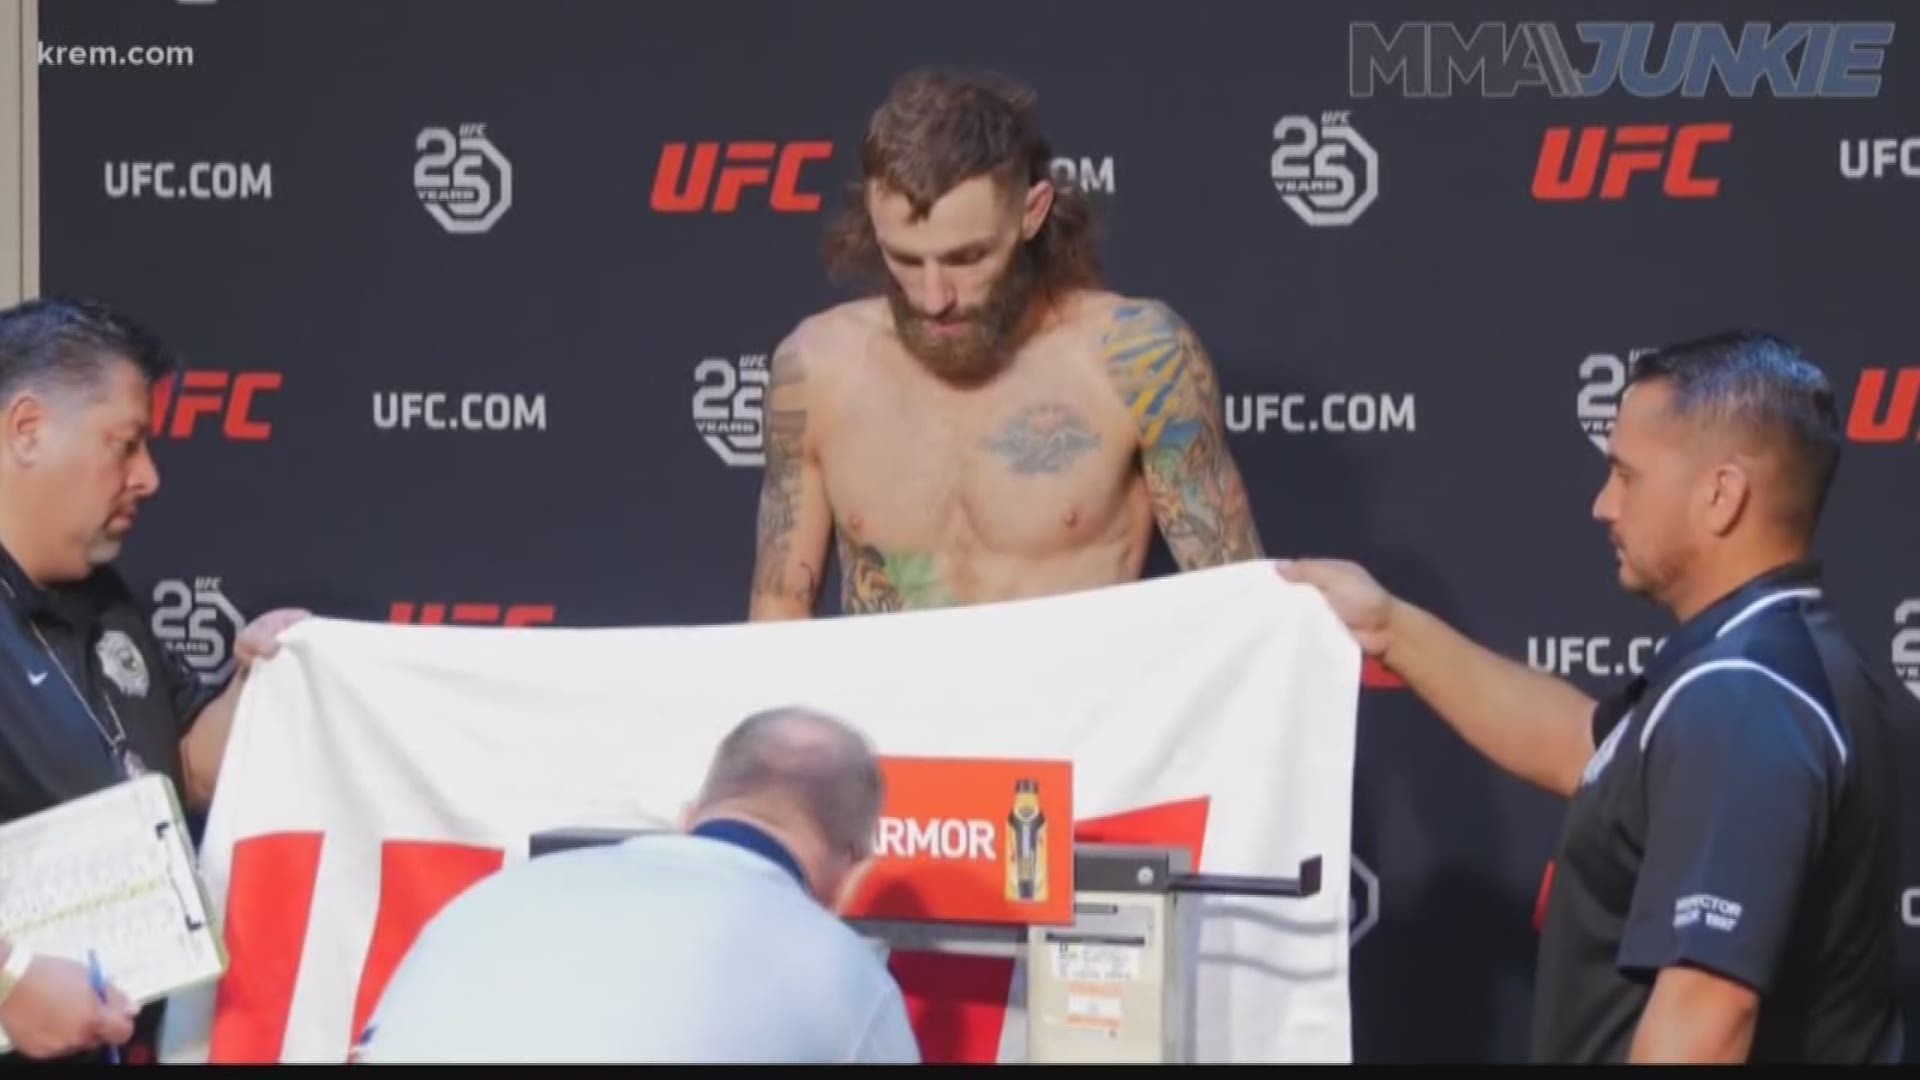 Chiesa failed to make weight for the first time in his career, then made a bold declaration. While his fight with Anthony Pettis is still on, an important conversation in the UFC rages on. (7-6-2018)